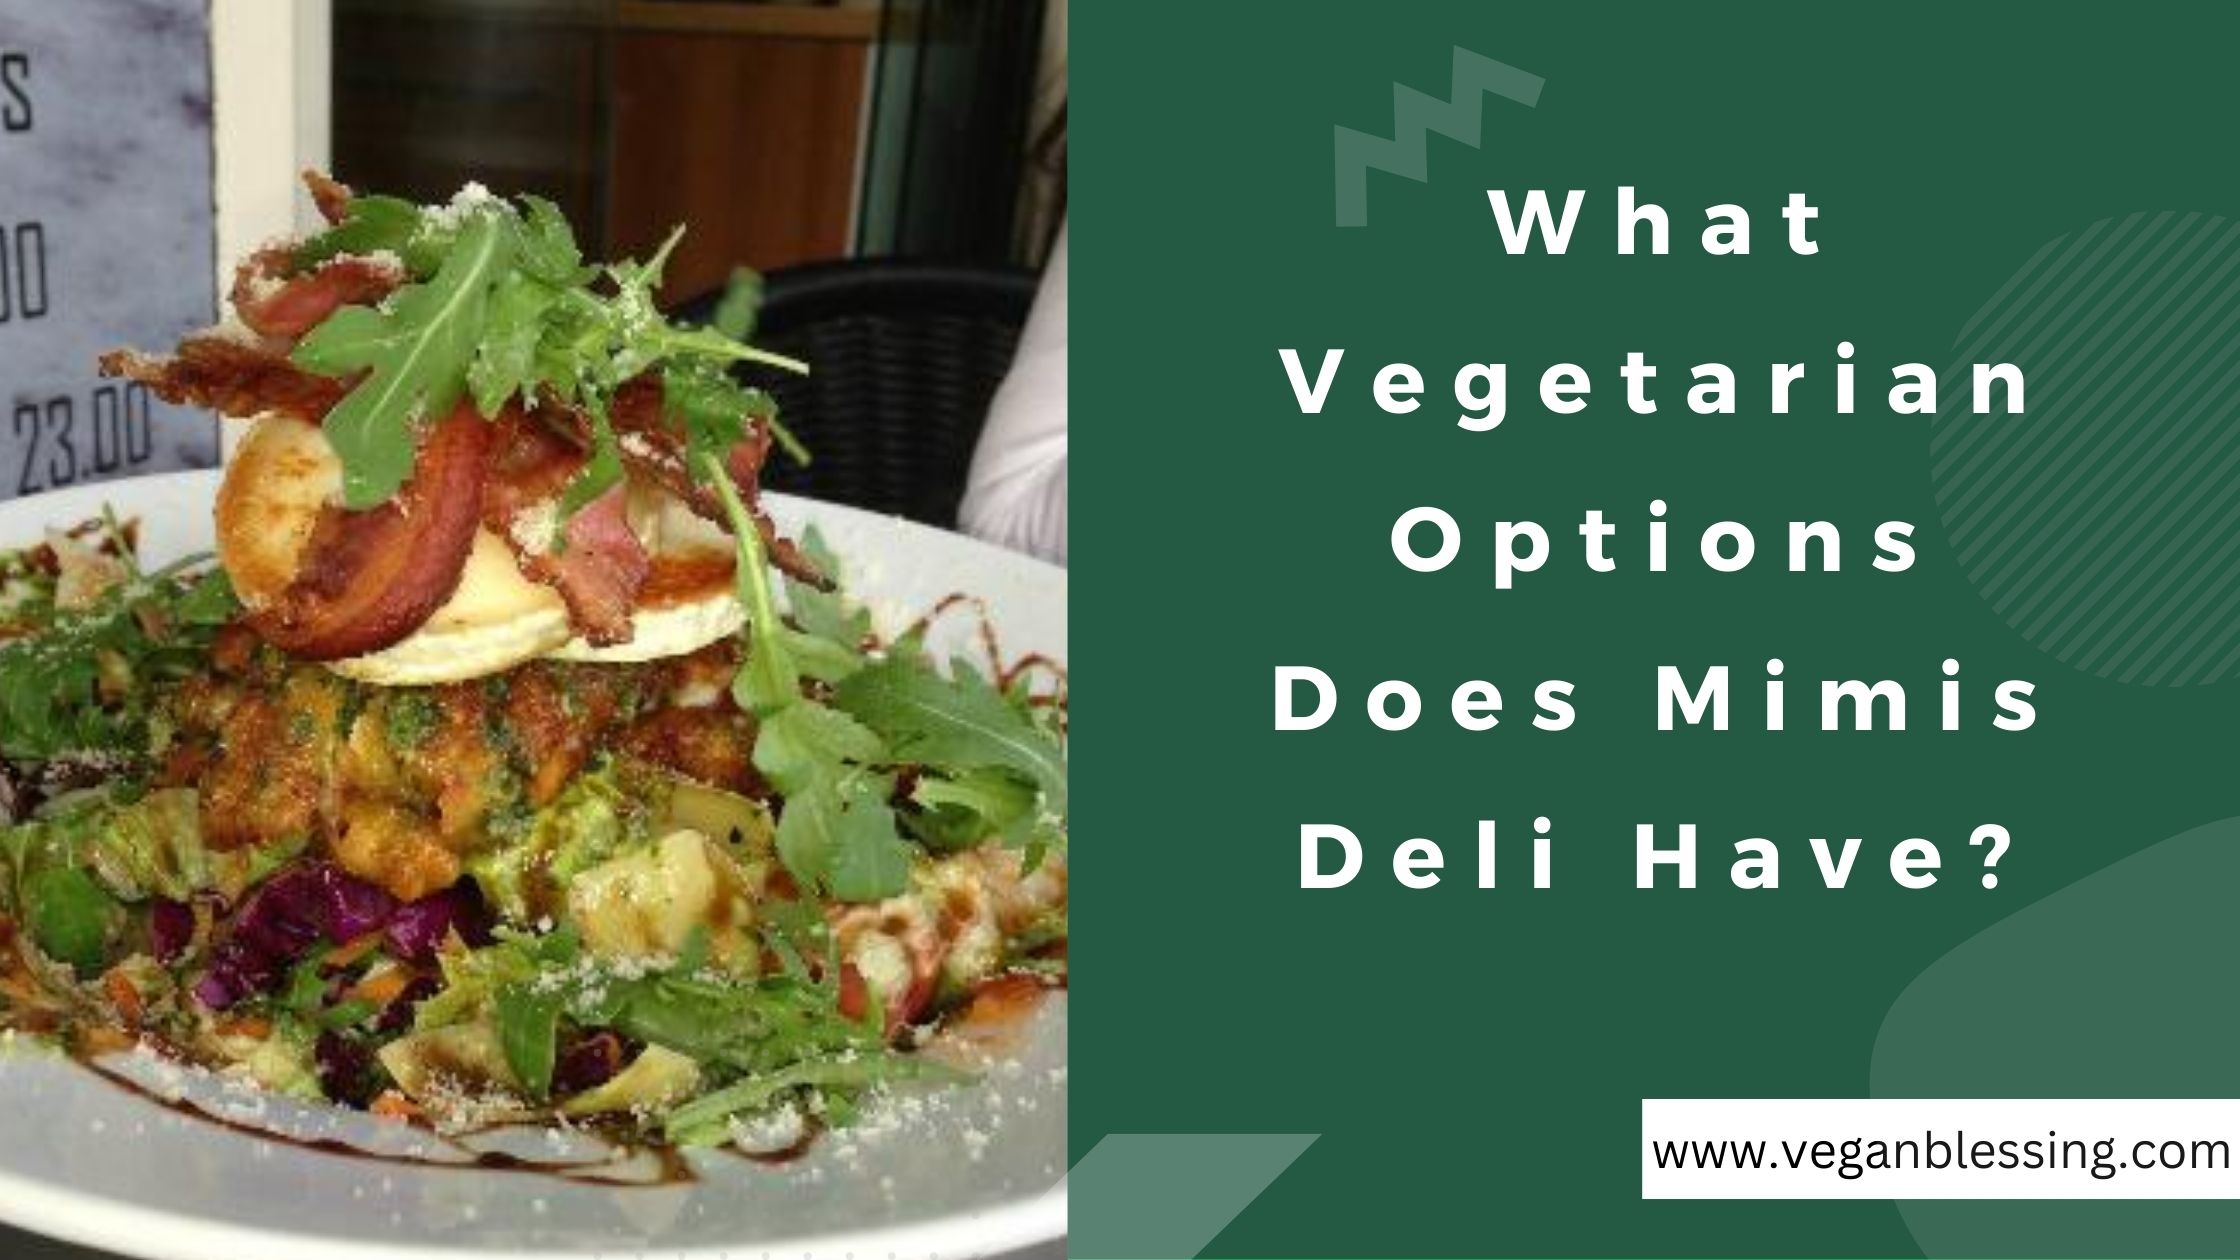 What Vegetarian Options Does Mimis Deli Have? What Vegetarian Options Does Mimis Deli Have